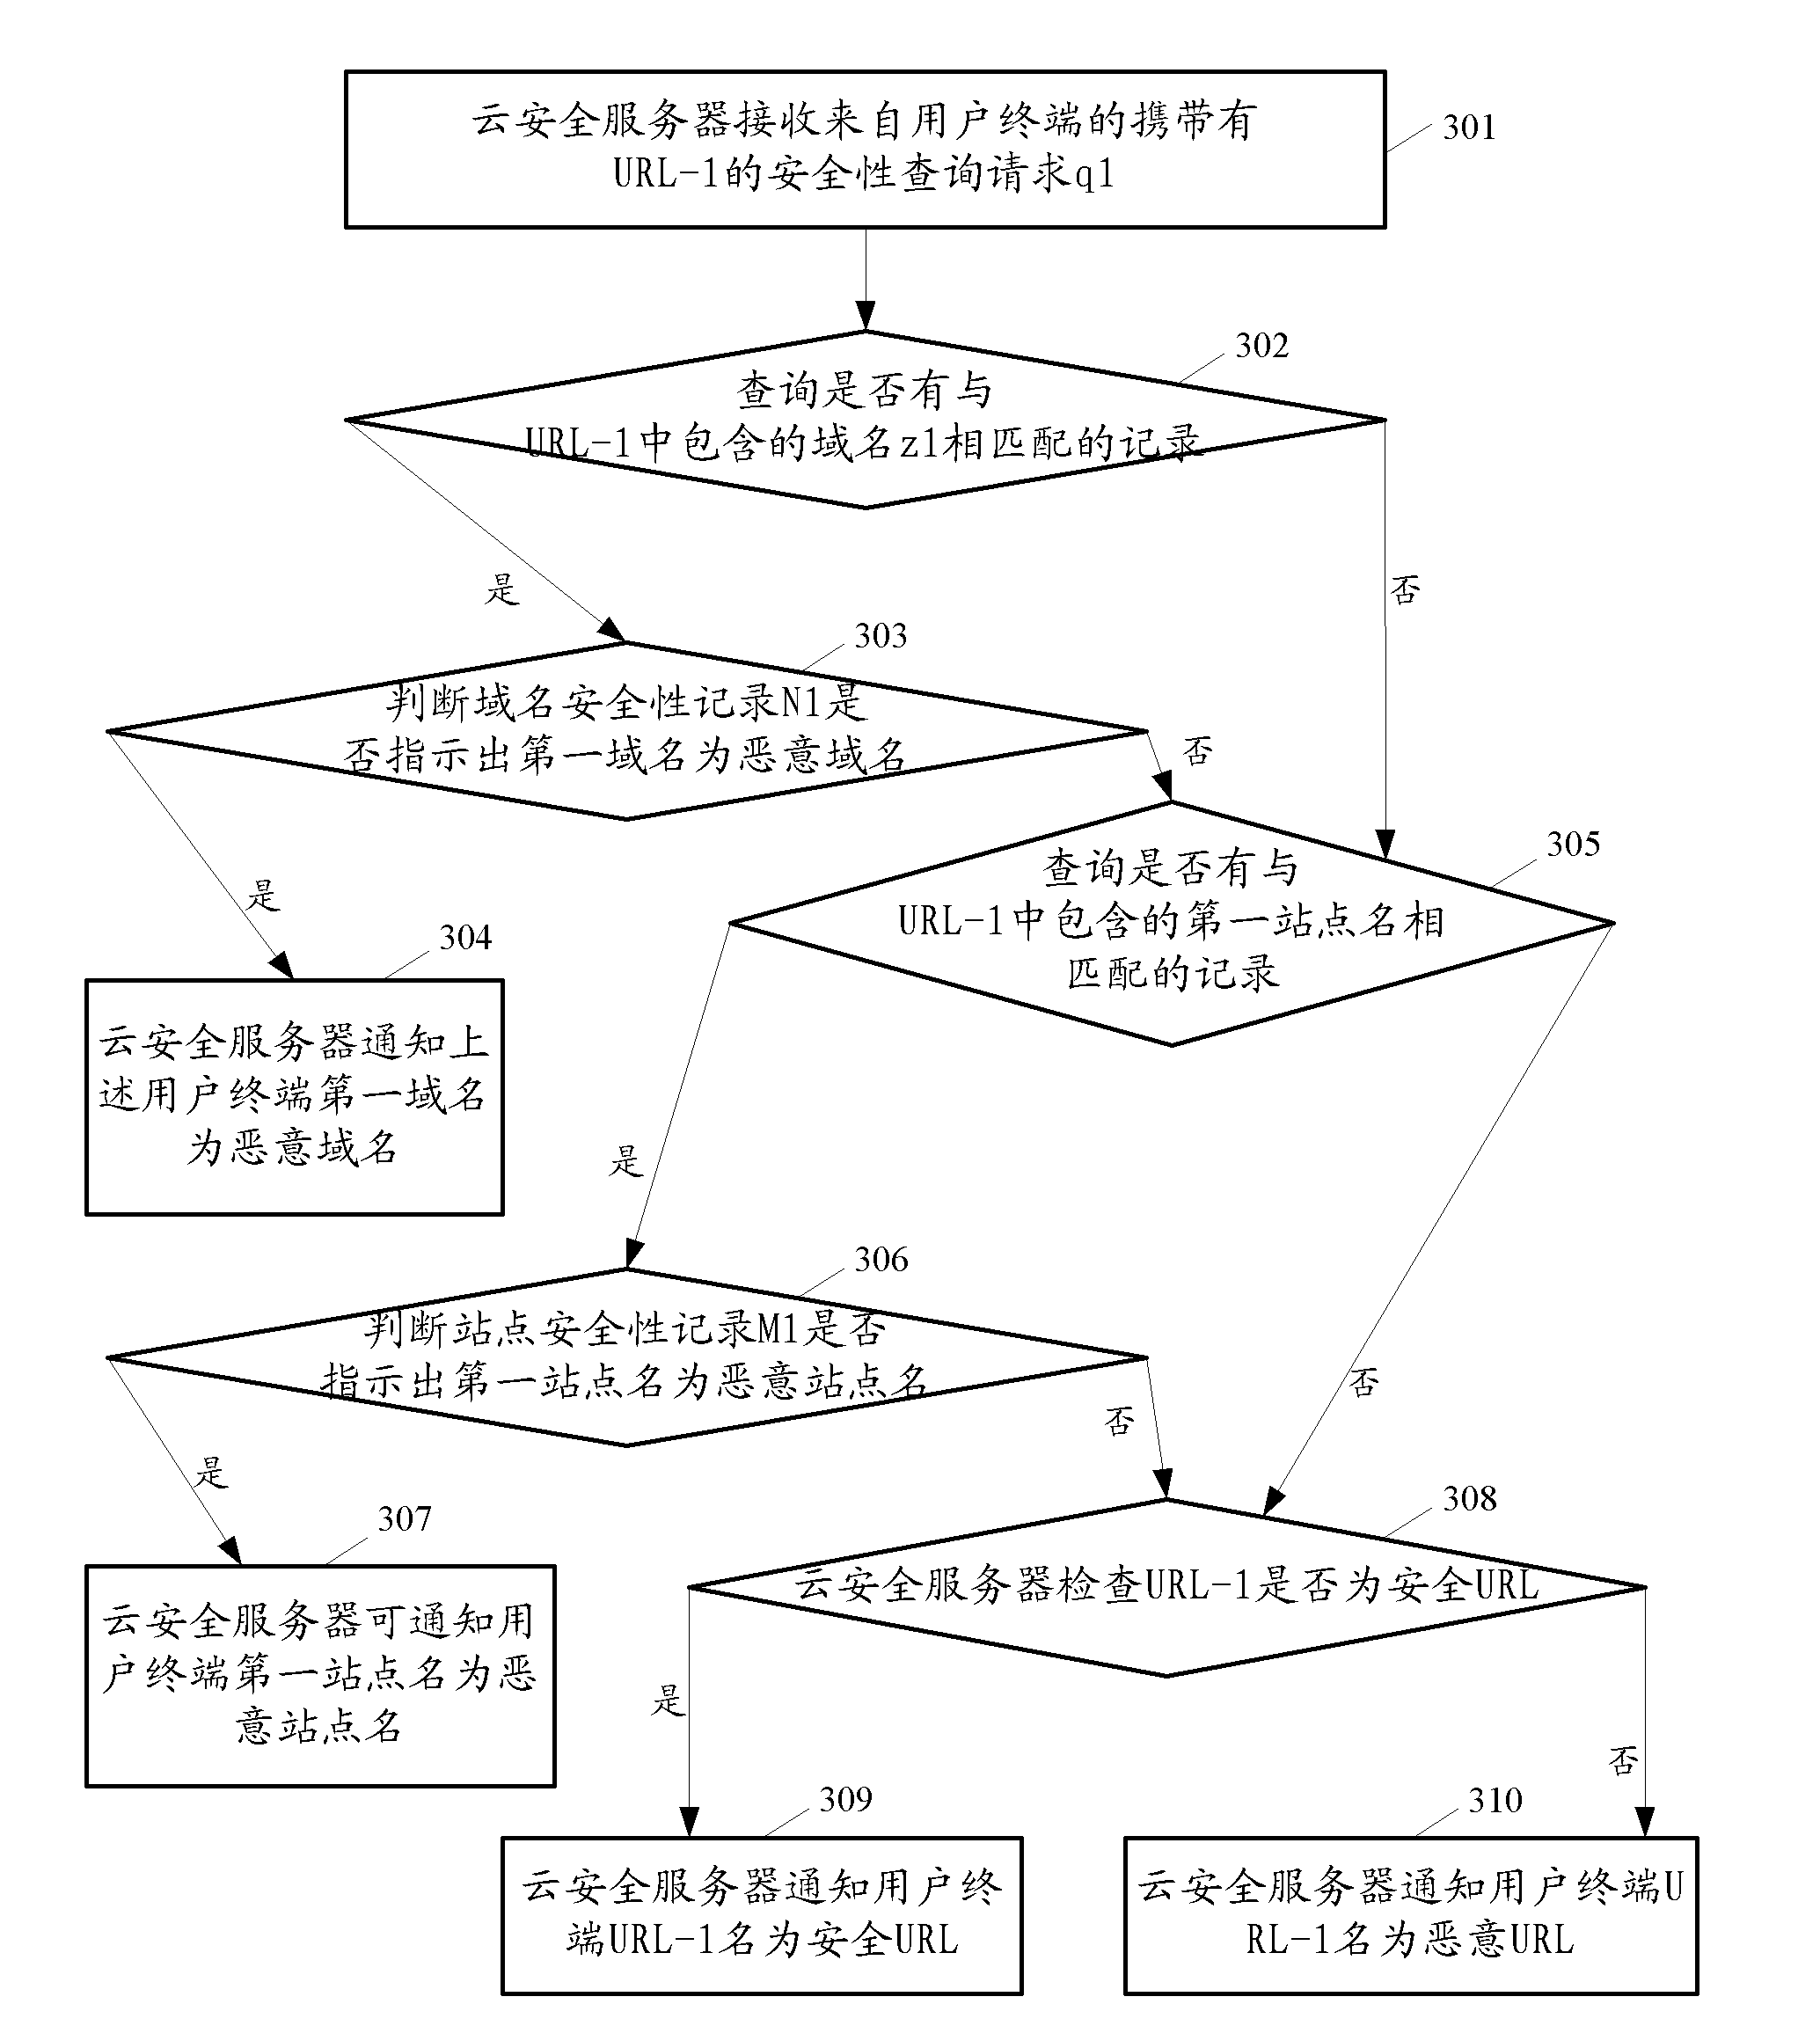 Malicious website access defending method and related device